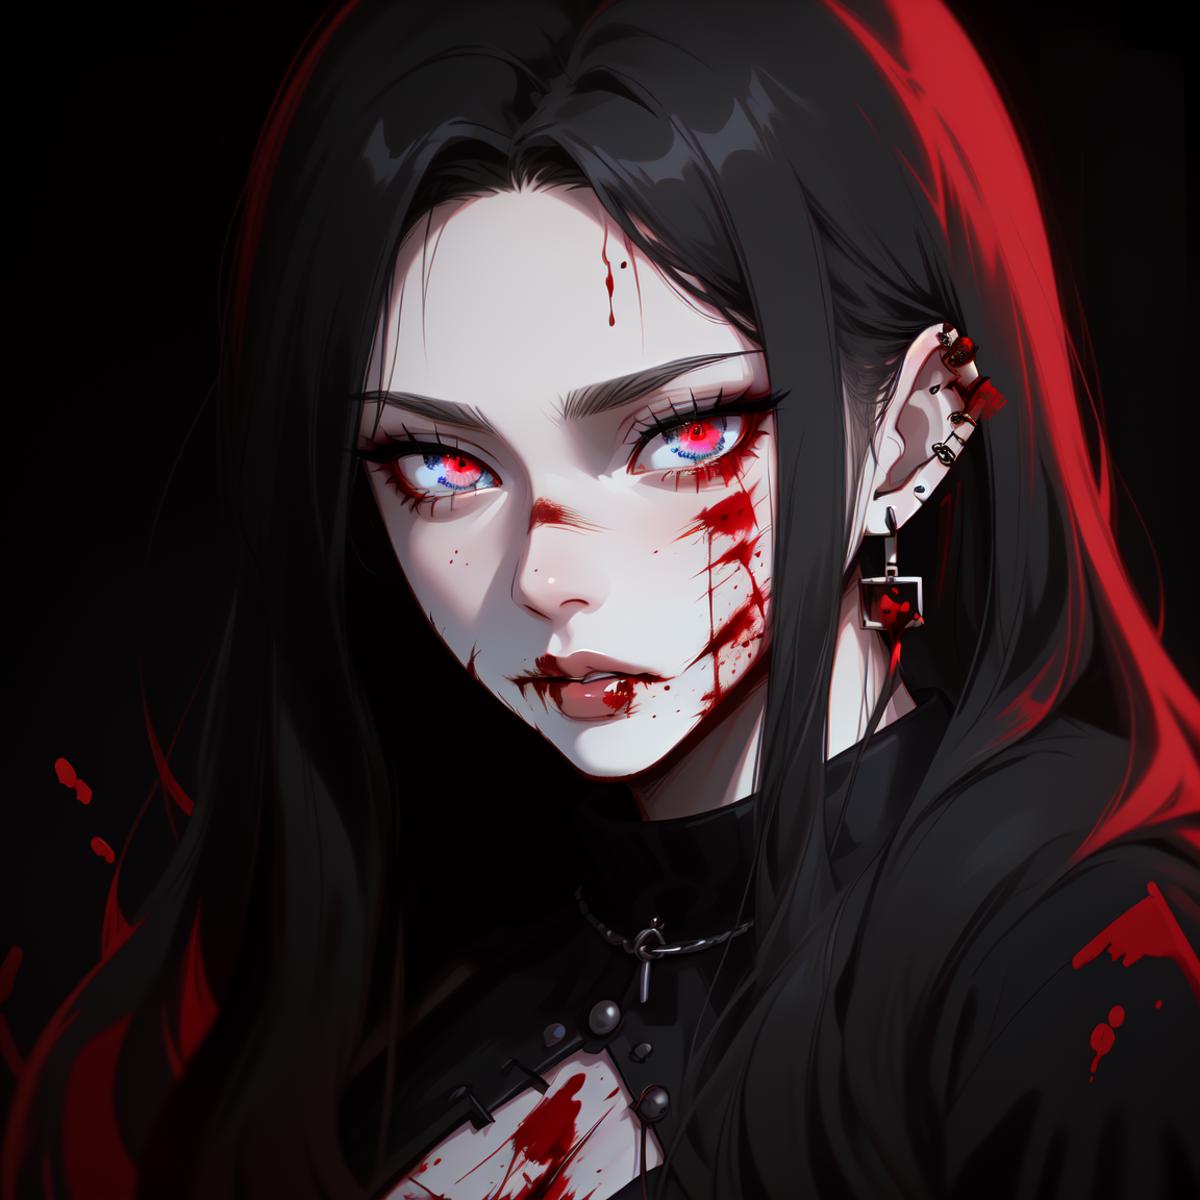 Gothic Girl image by We11